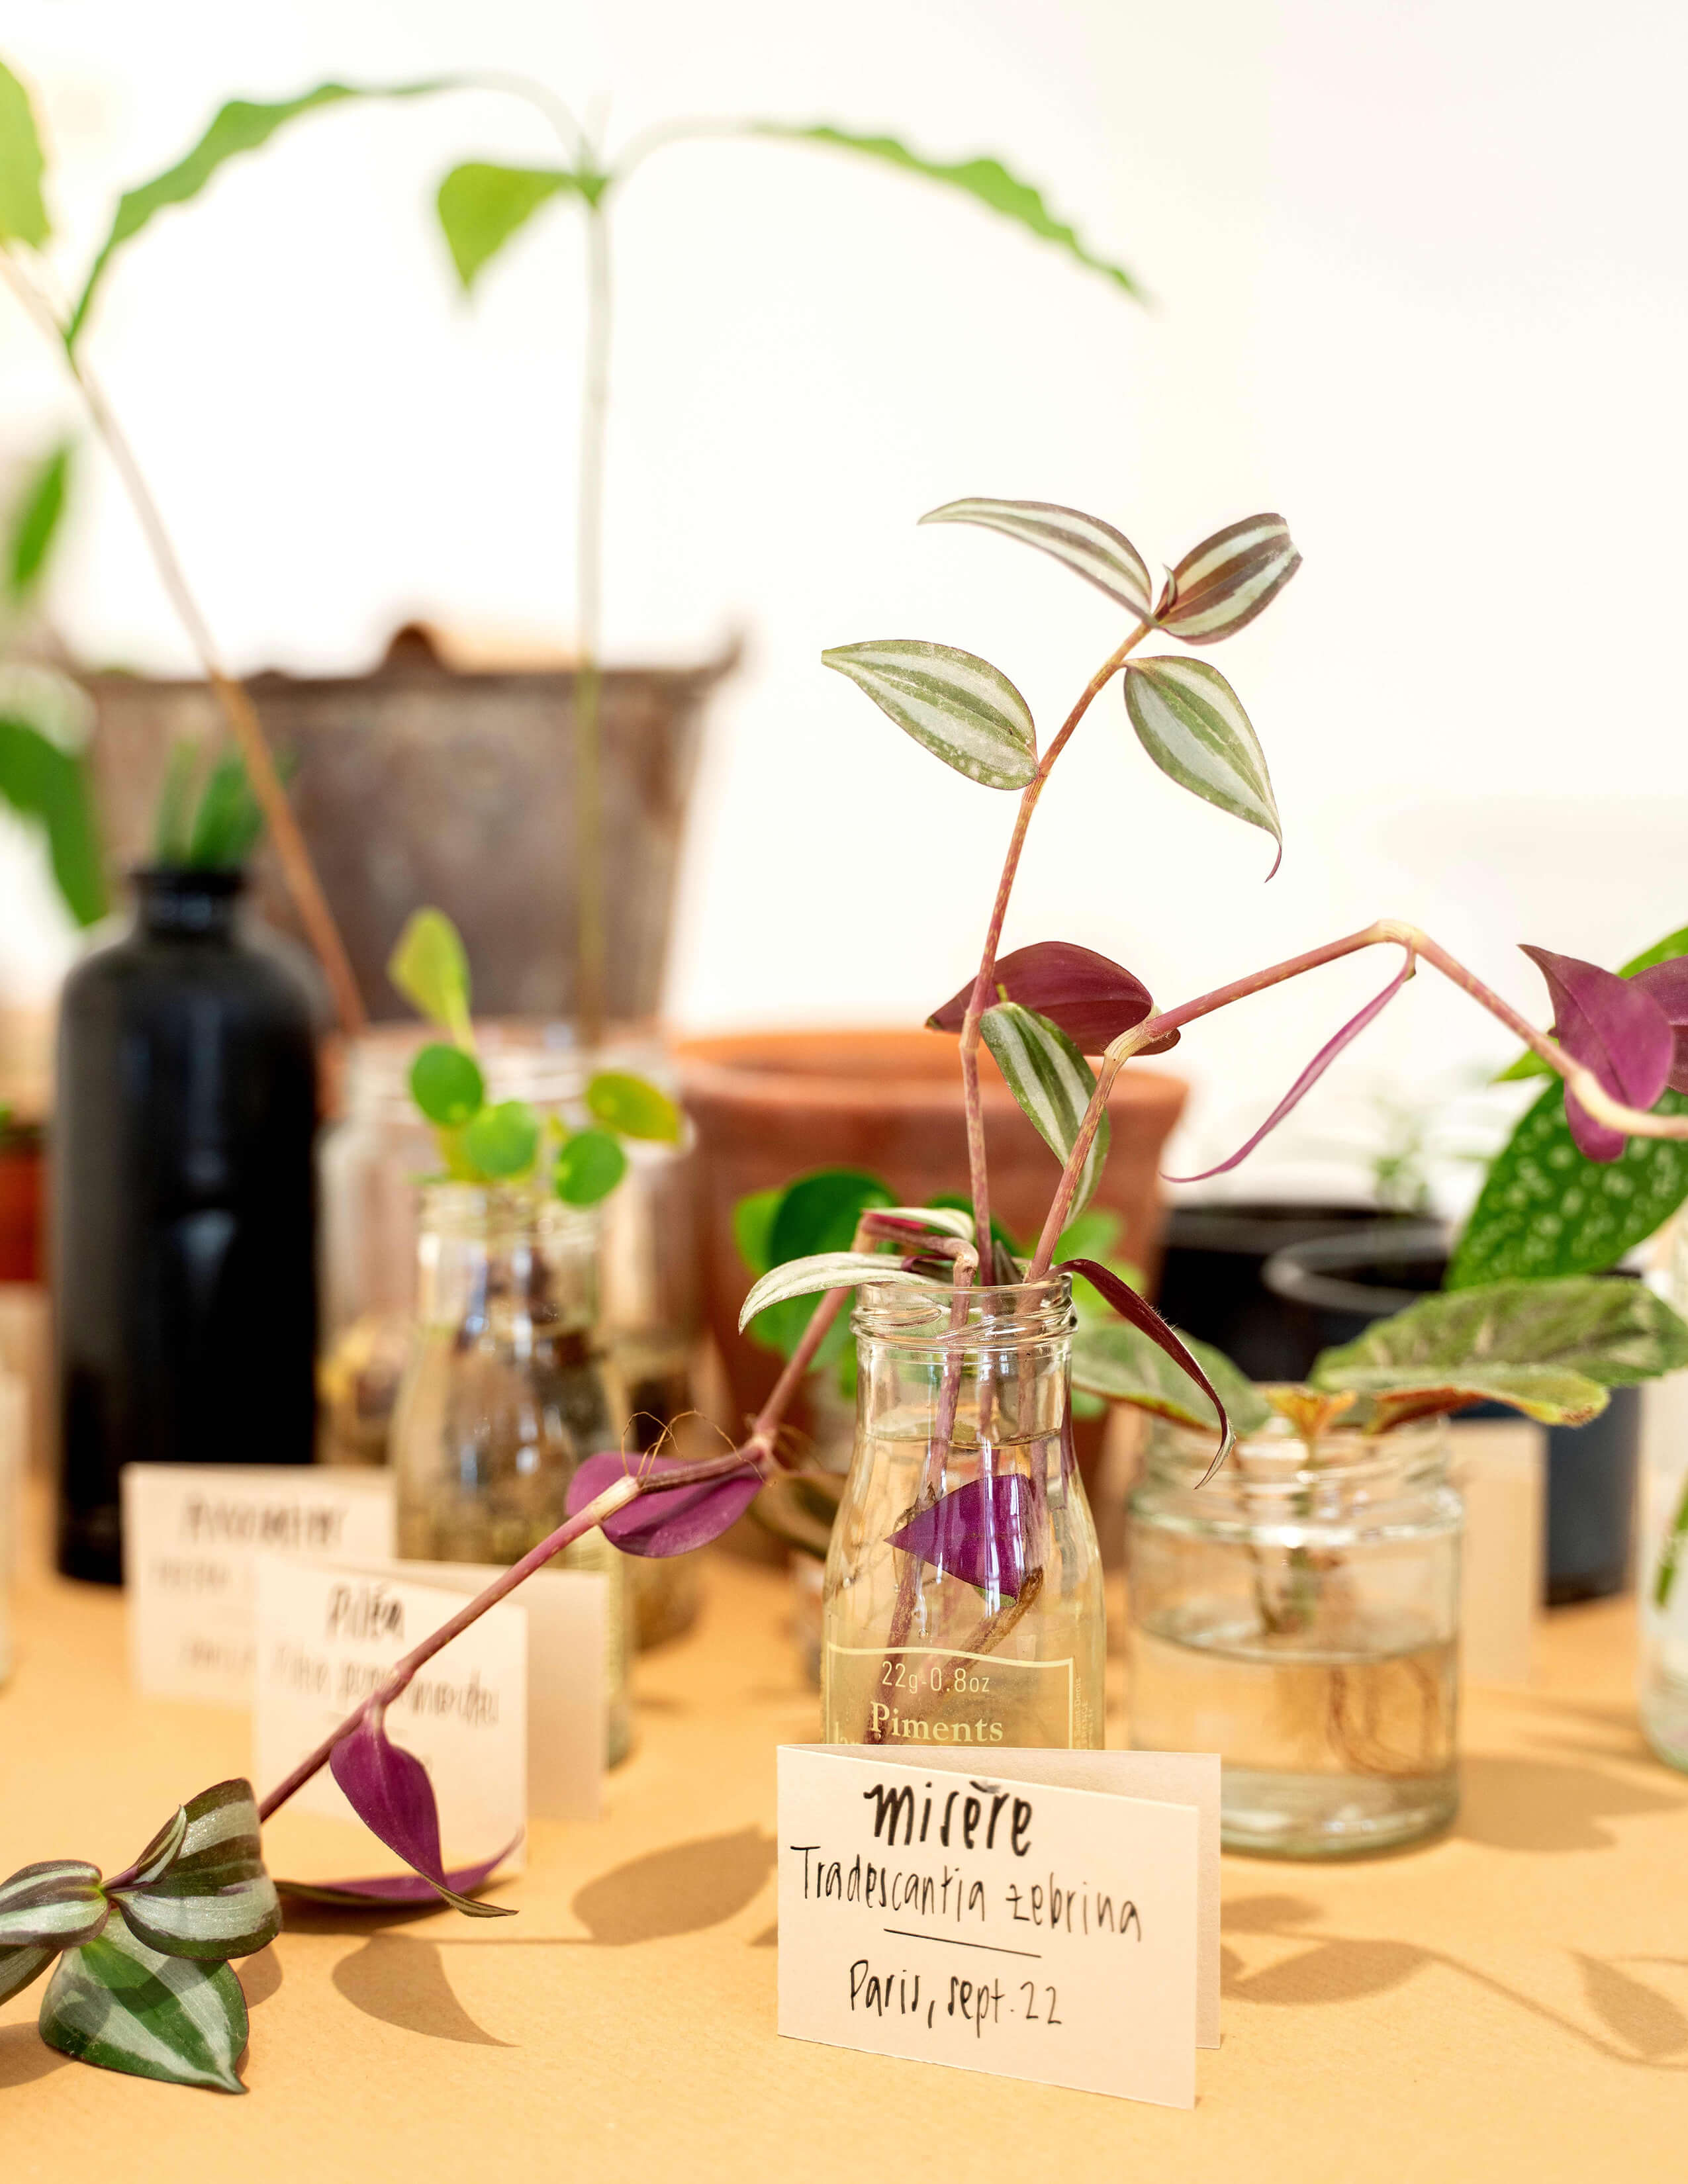 A plant with purple stems - Tradescantia zebrina grows in a glass bottle filled with water and a name tag next to it while there are different kinds of plants around it on the table.